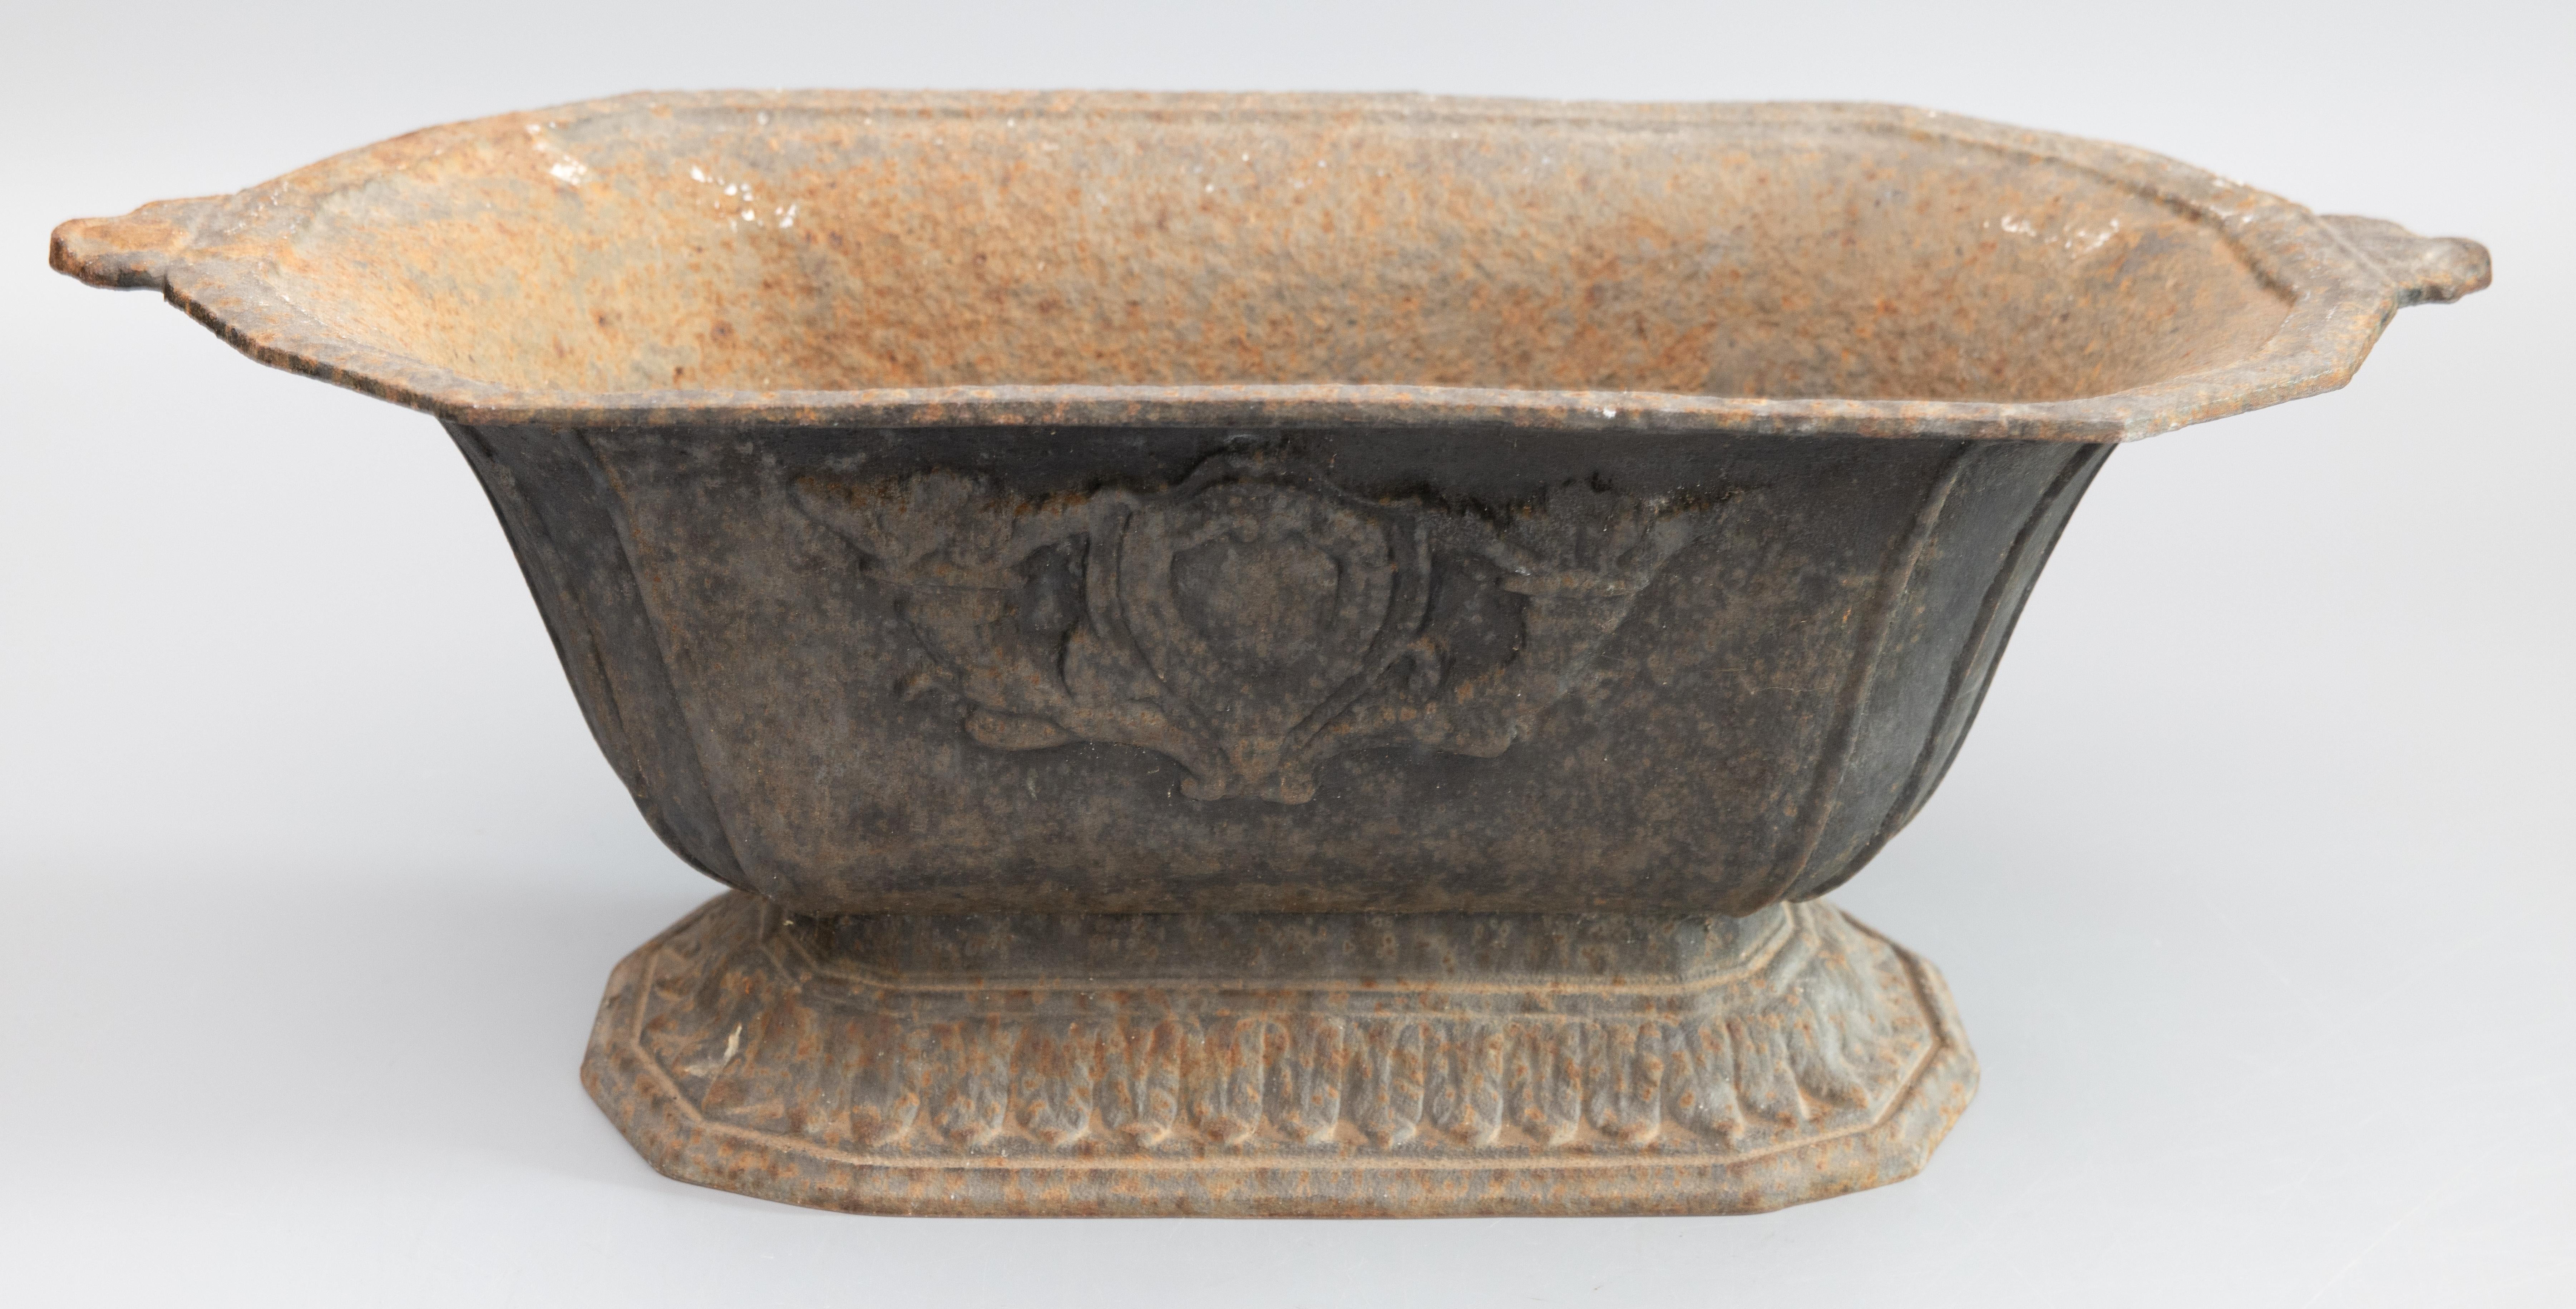 A gorgeous antique 19th-Century French cast iron jardiniere or planter with the lovely original surface and patina. This beautiful jardiniere is nice large size, heavy and well cast, with a Neoclassical design and a lovely weathered patina. It's